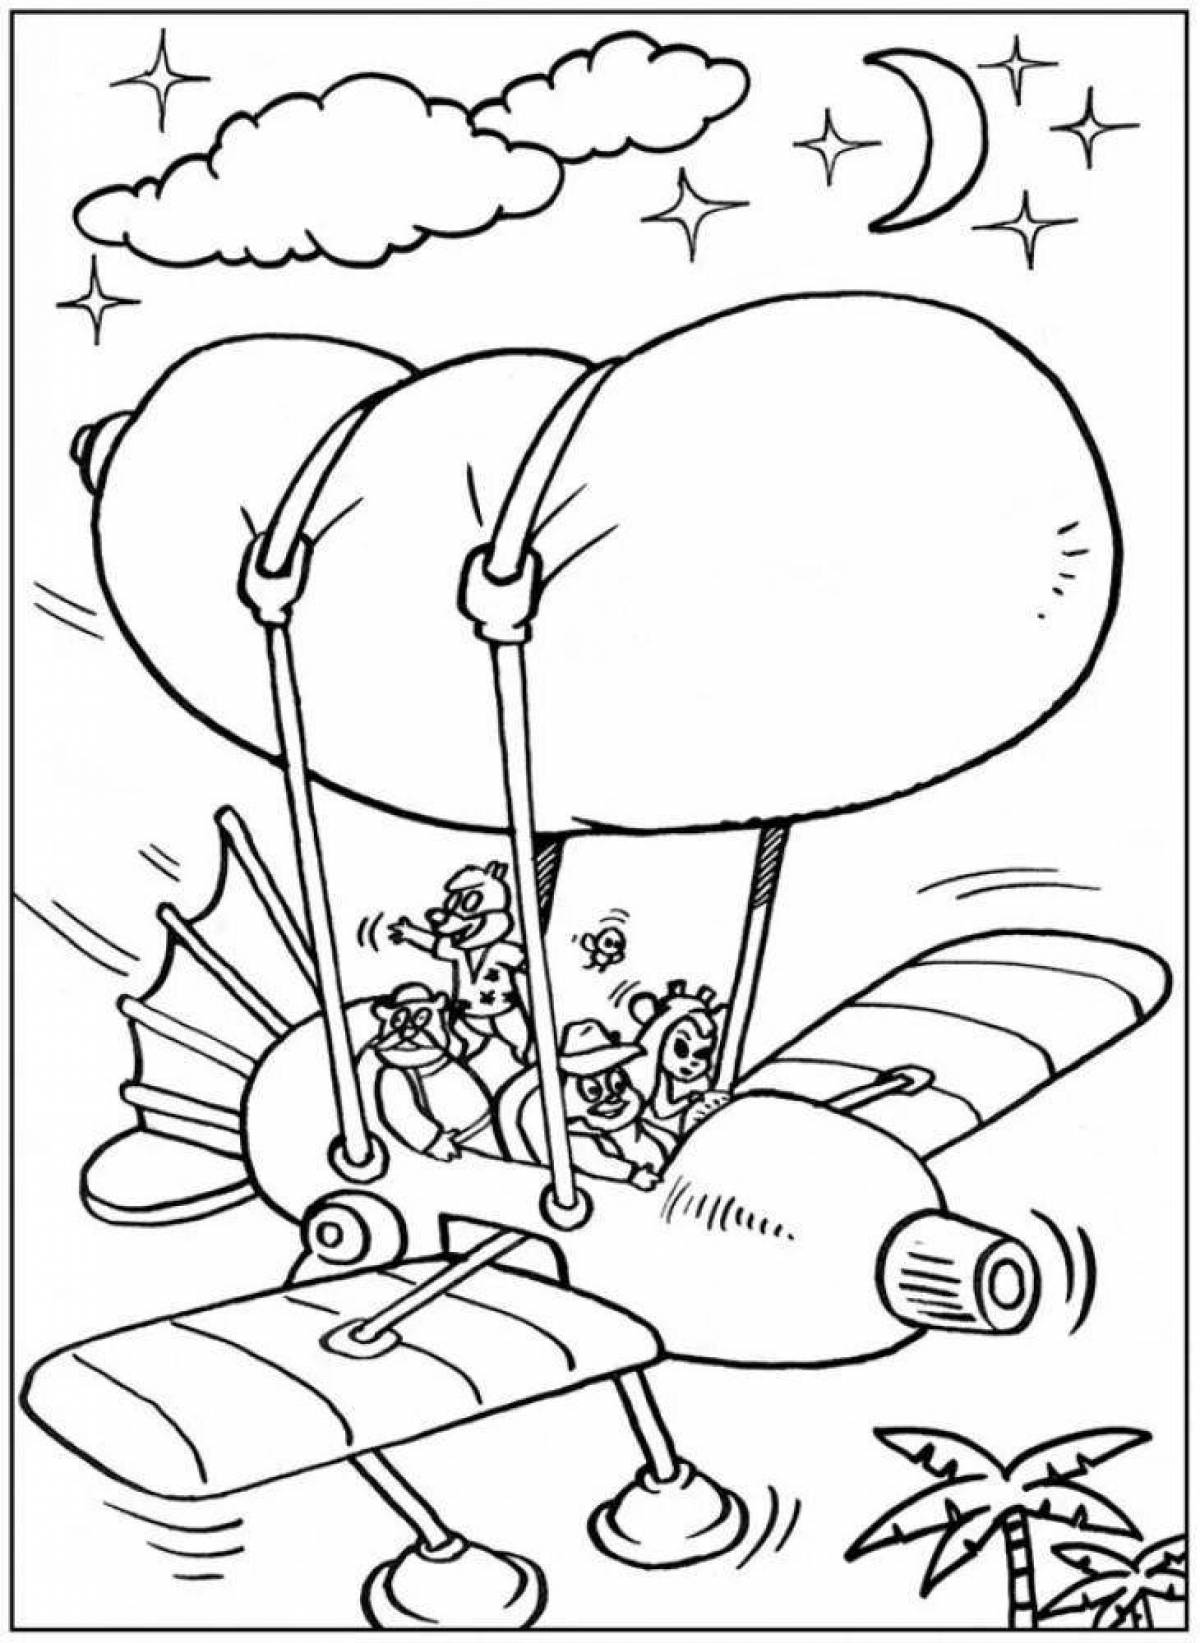 Amazing aircraft coloring page